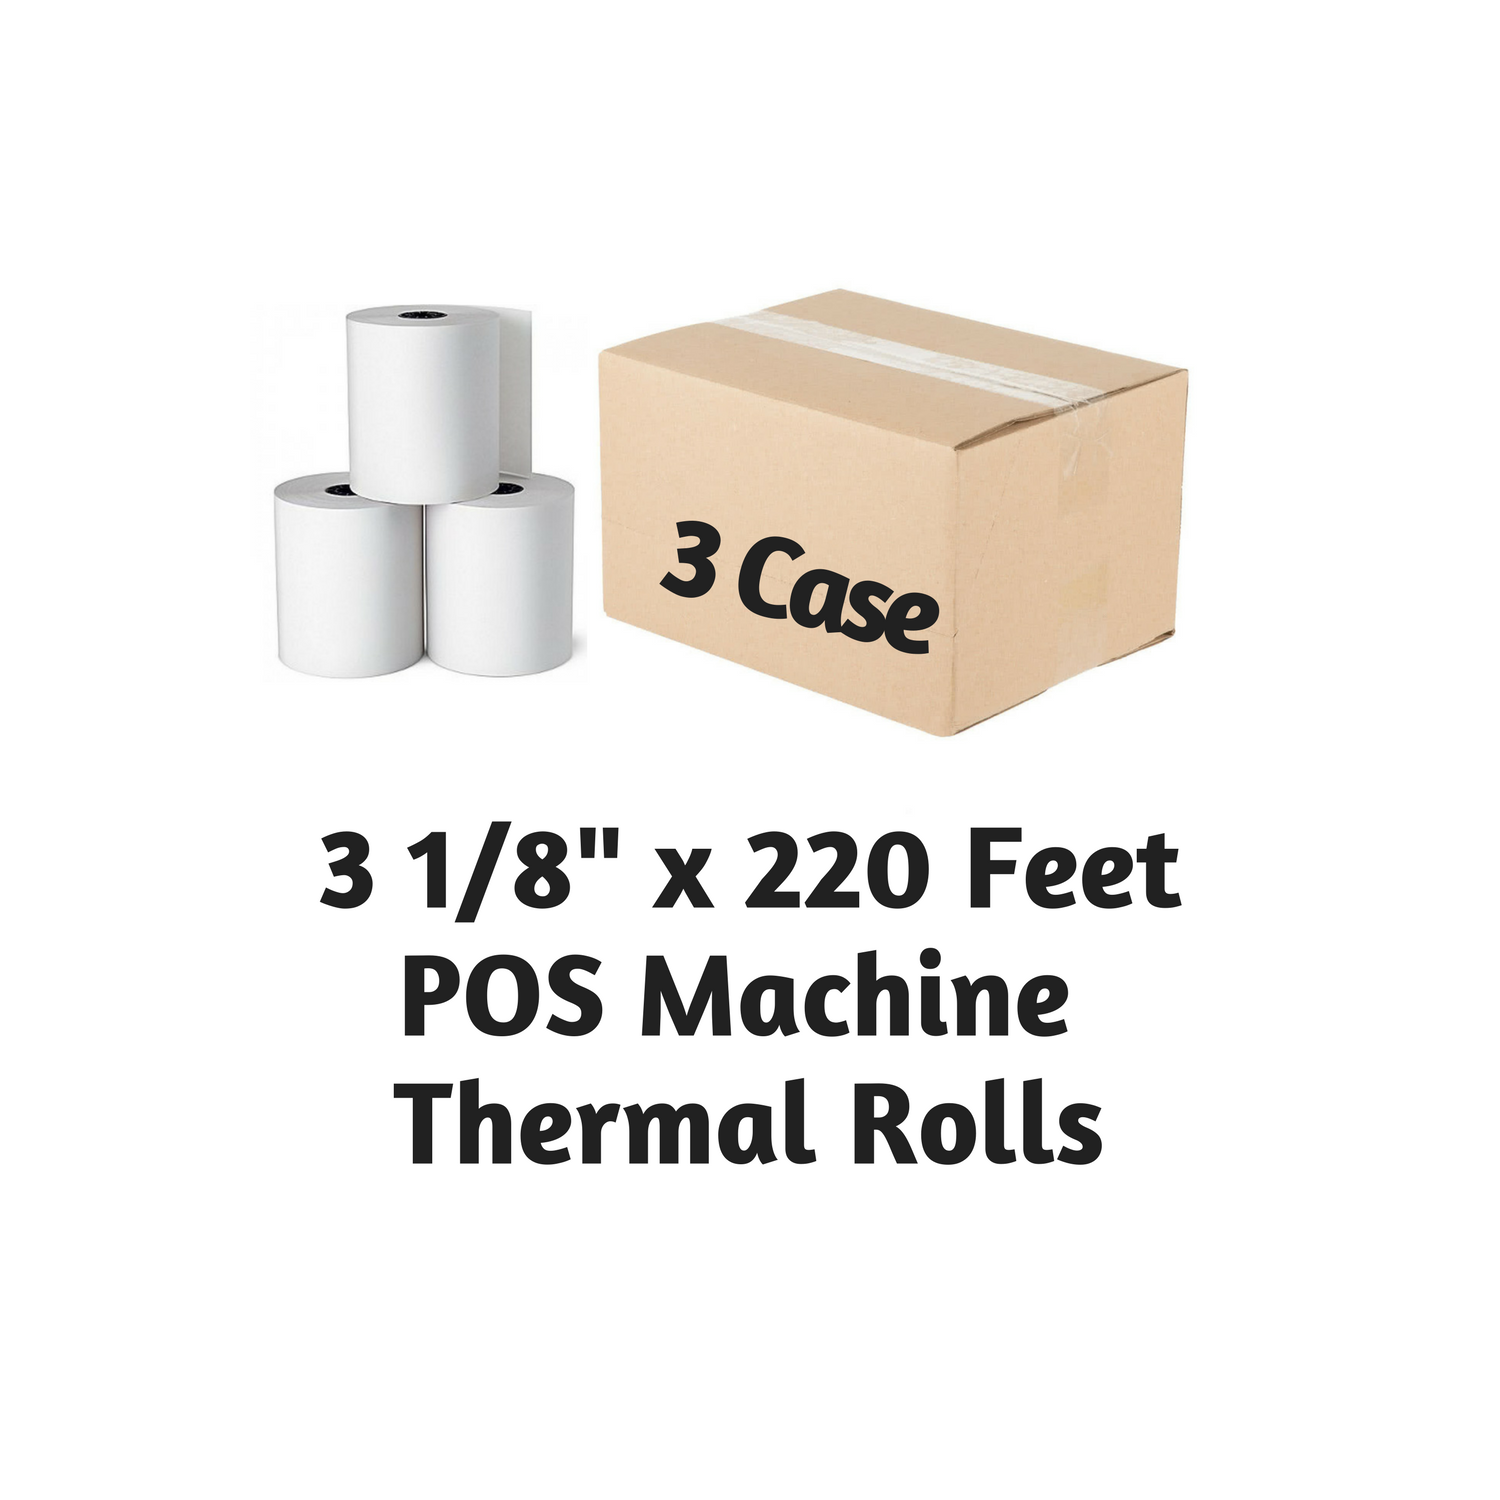 3 1/8" x 225' Feet Thermal Paper Rolls (50 rolls/Case) 3 Cases - FREE SHIPPING POS MACHINE ROLLS